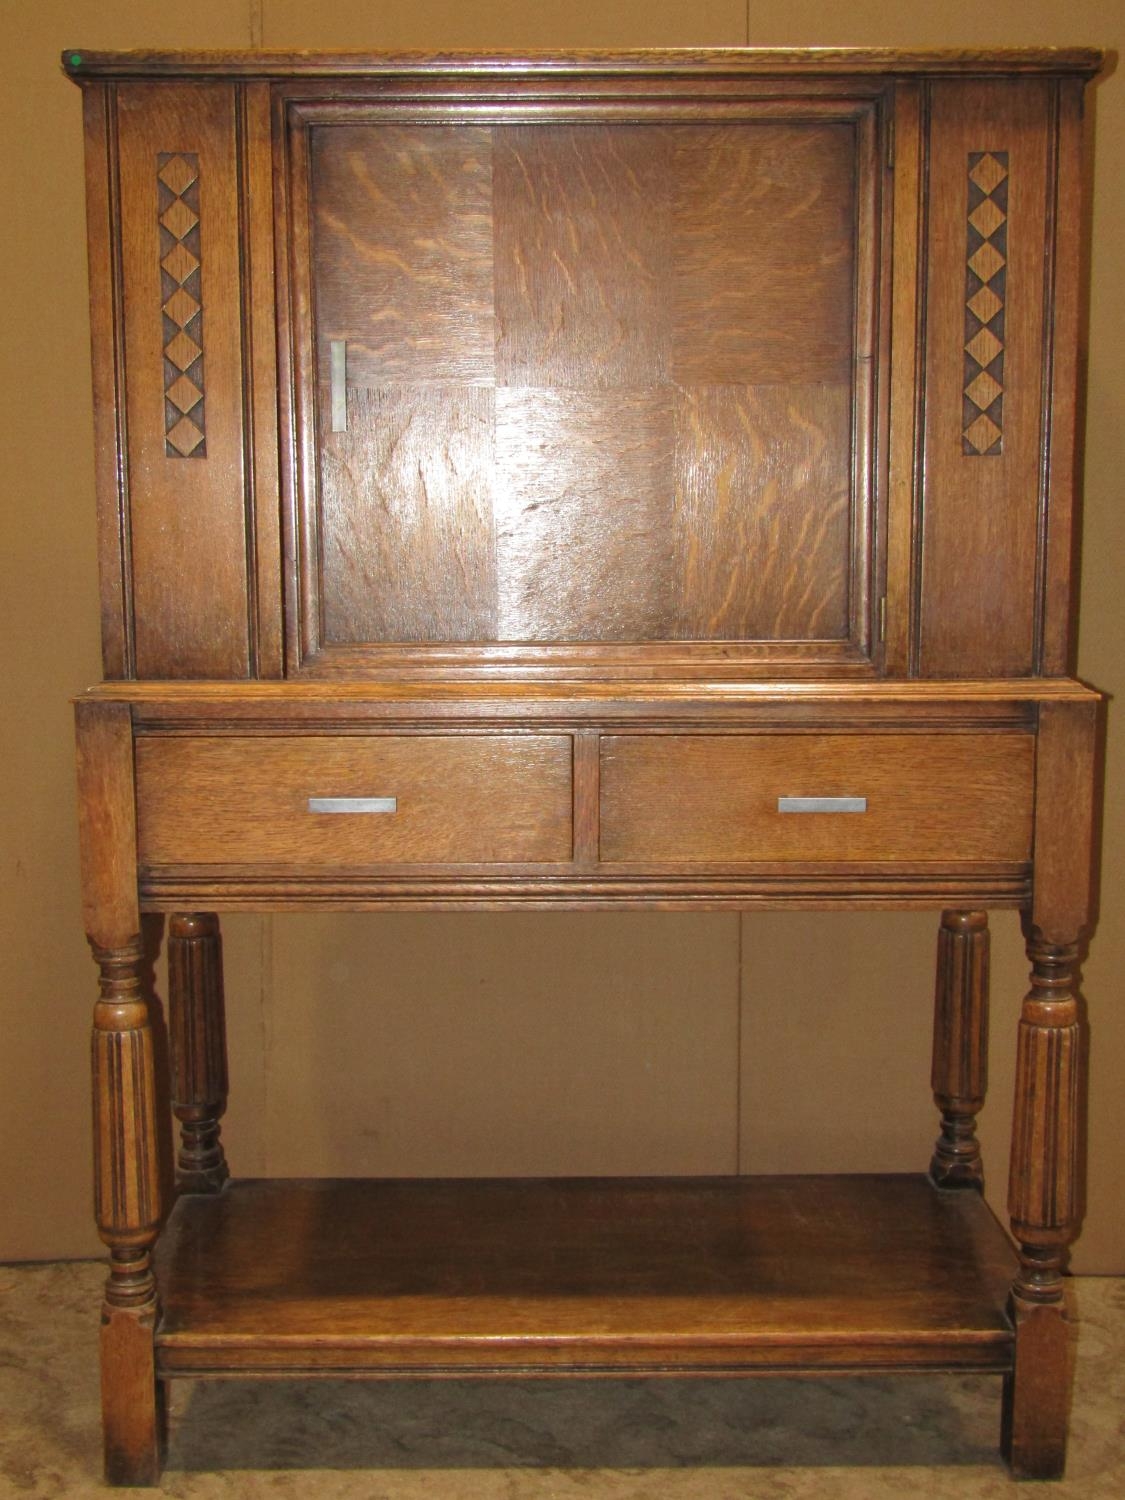 An early 20th century oak freestanding side cupboard enclosed by a central panelled door, with